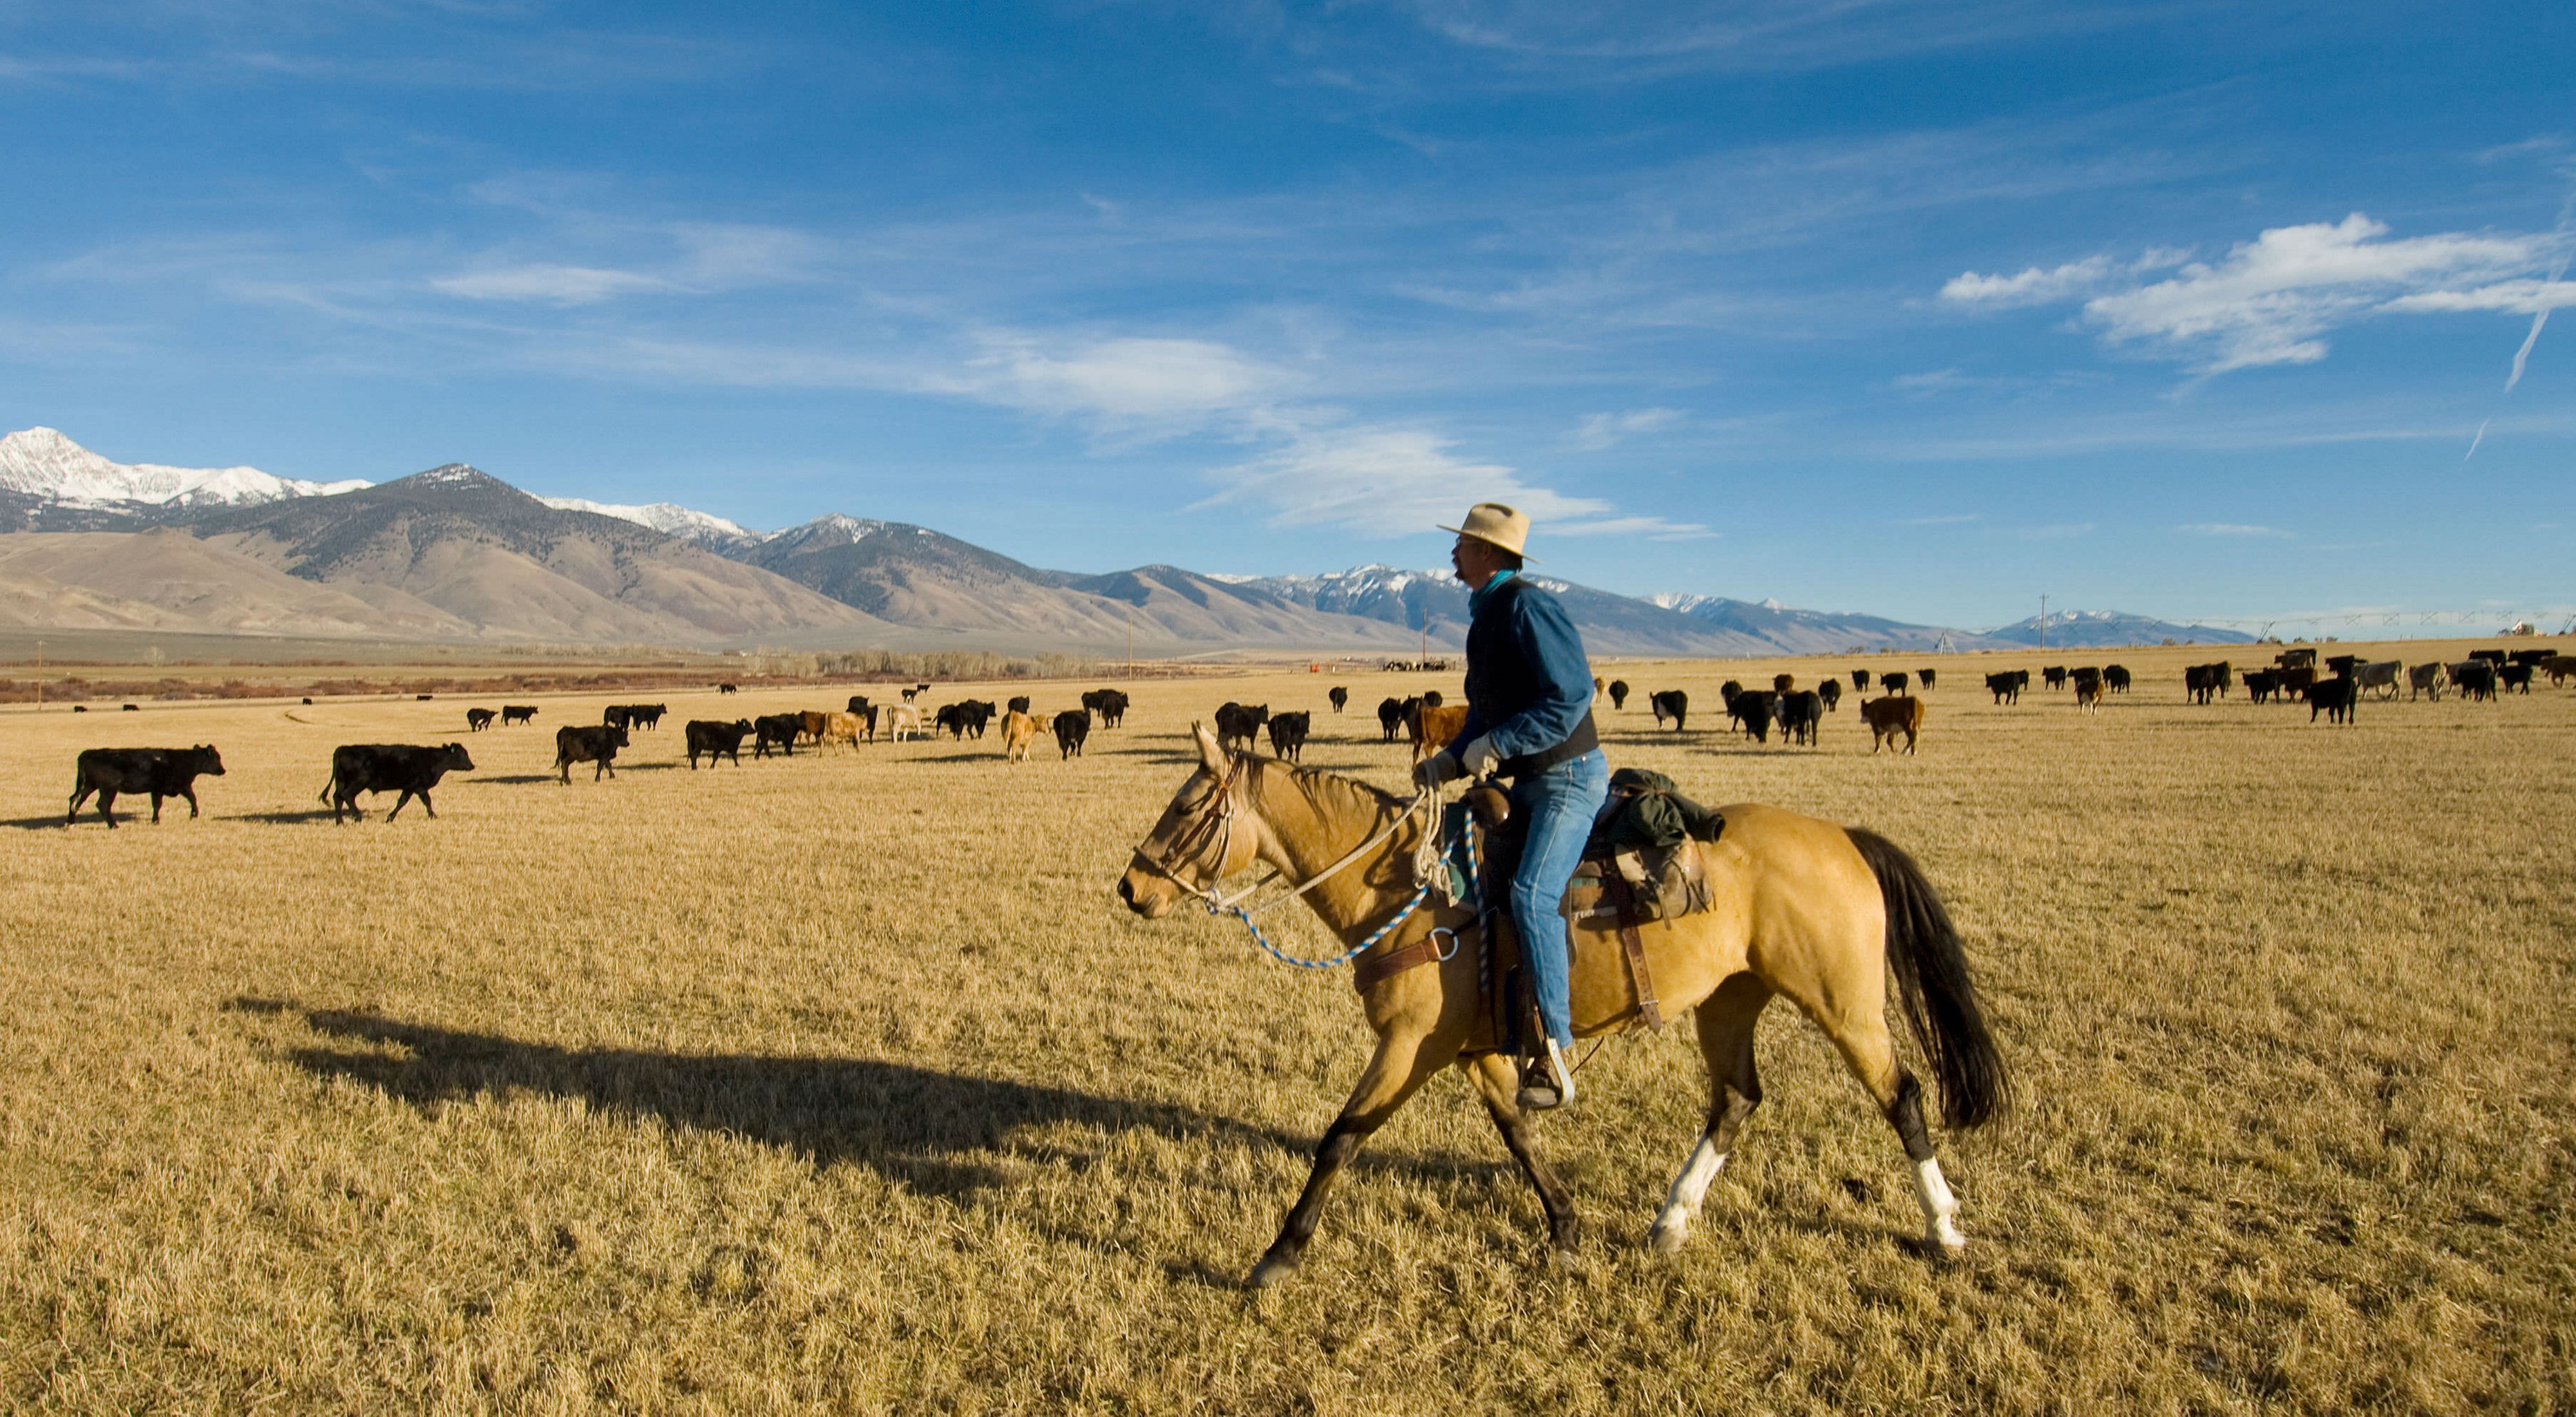 A man rides a horse through a field with grazing cattle.